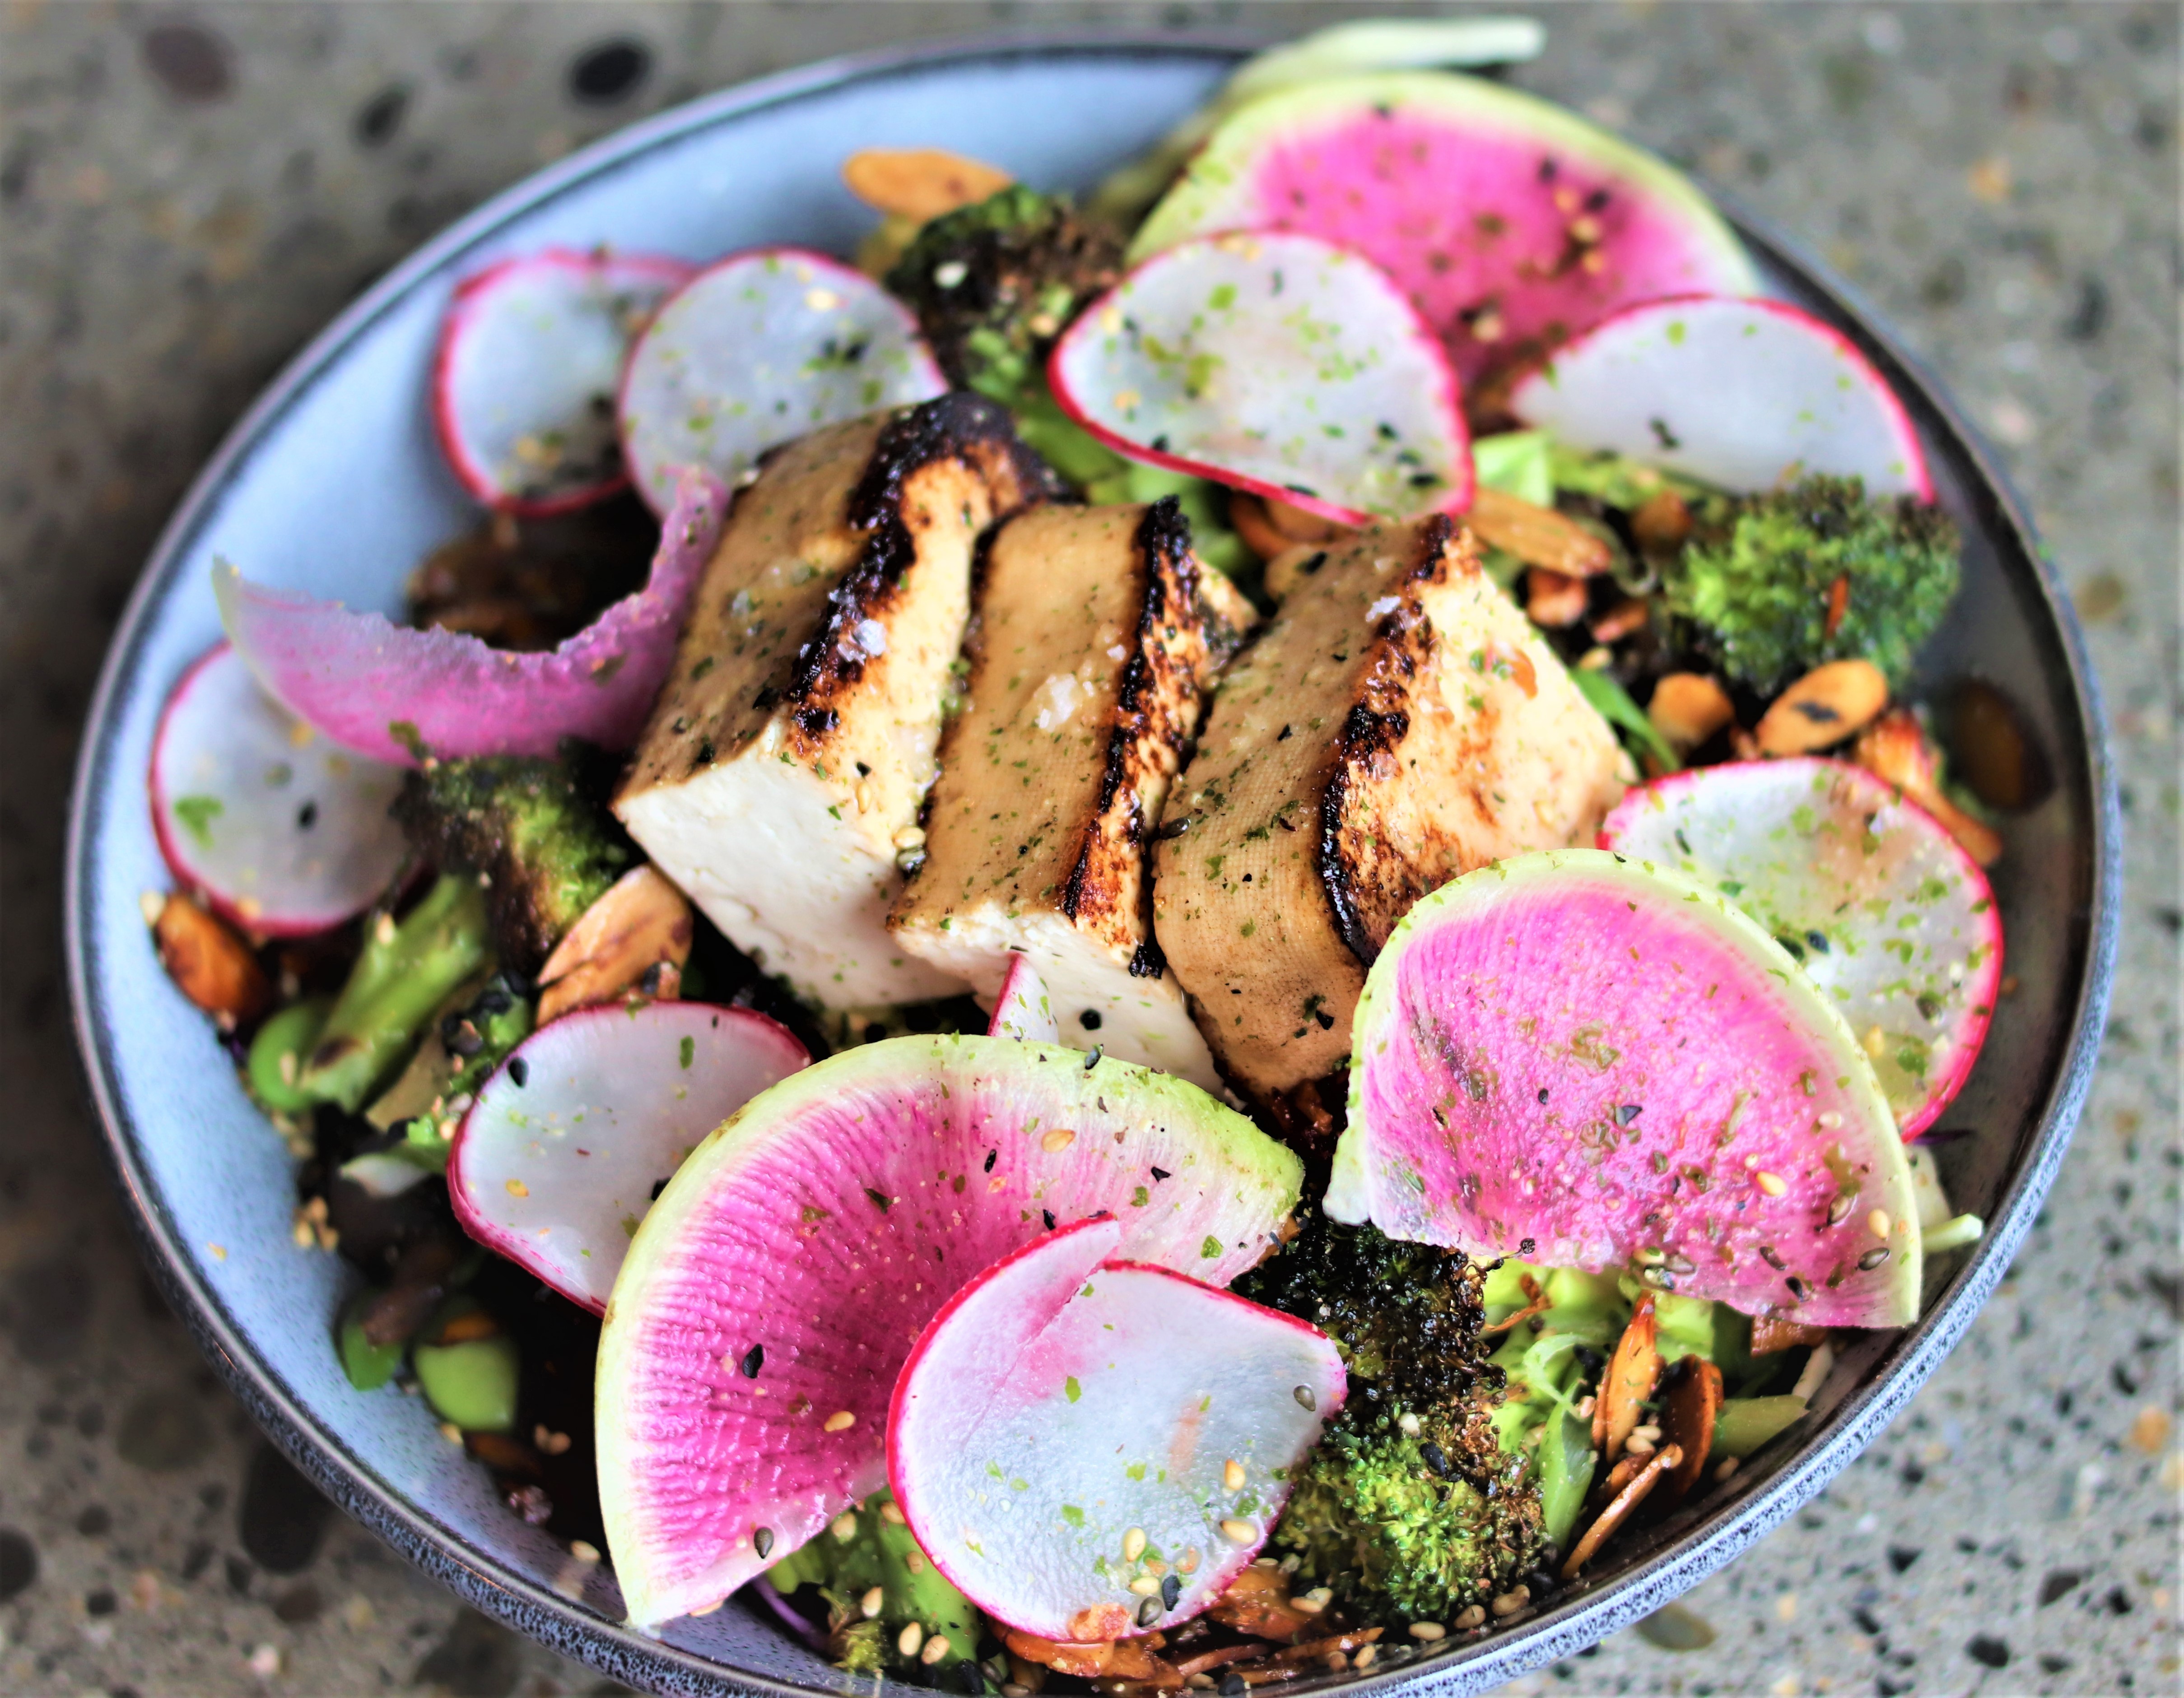 Three pieces of tofu sit on a bowl of greens with slices of watermelon radish